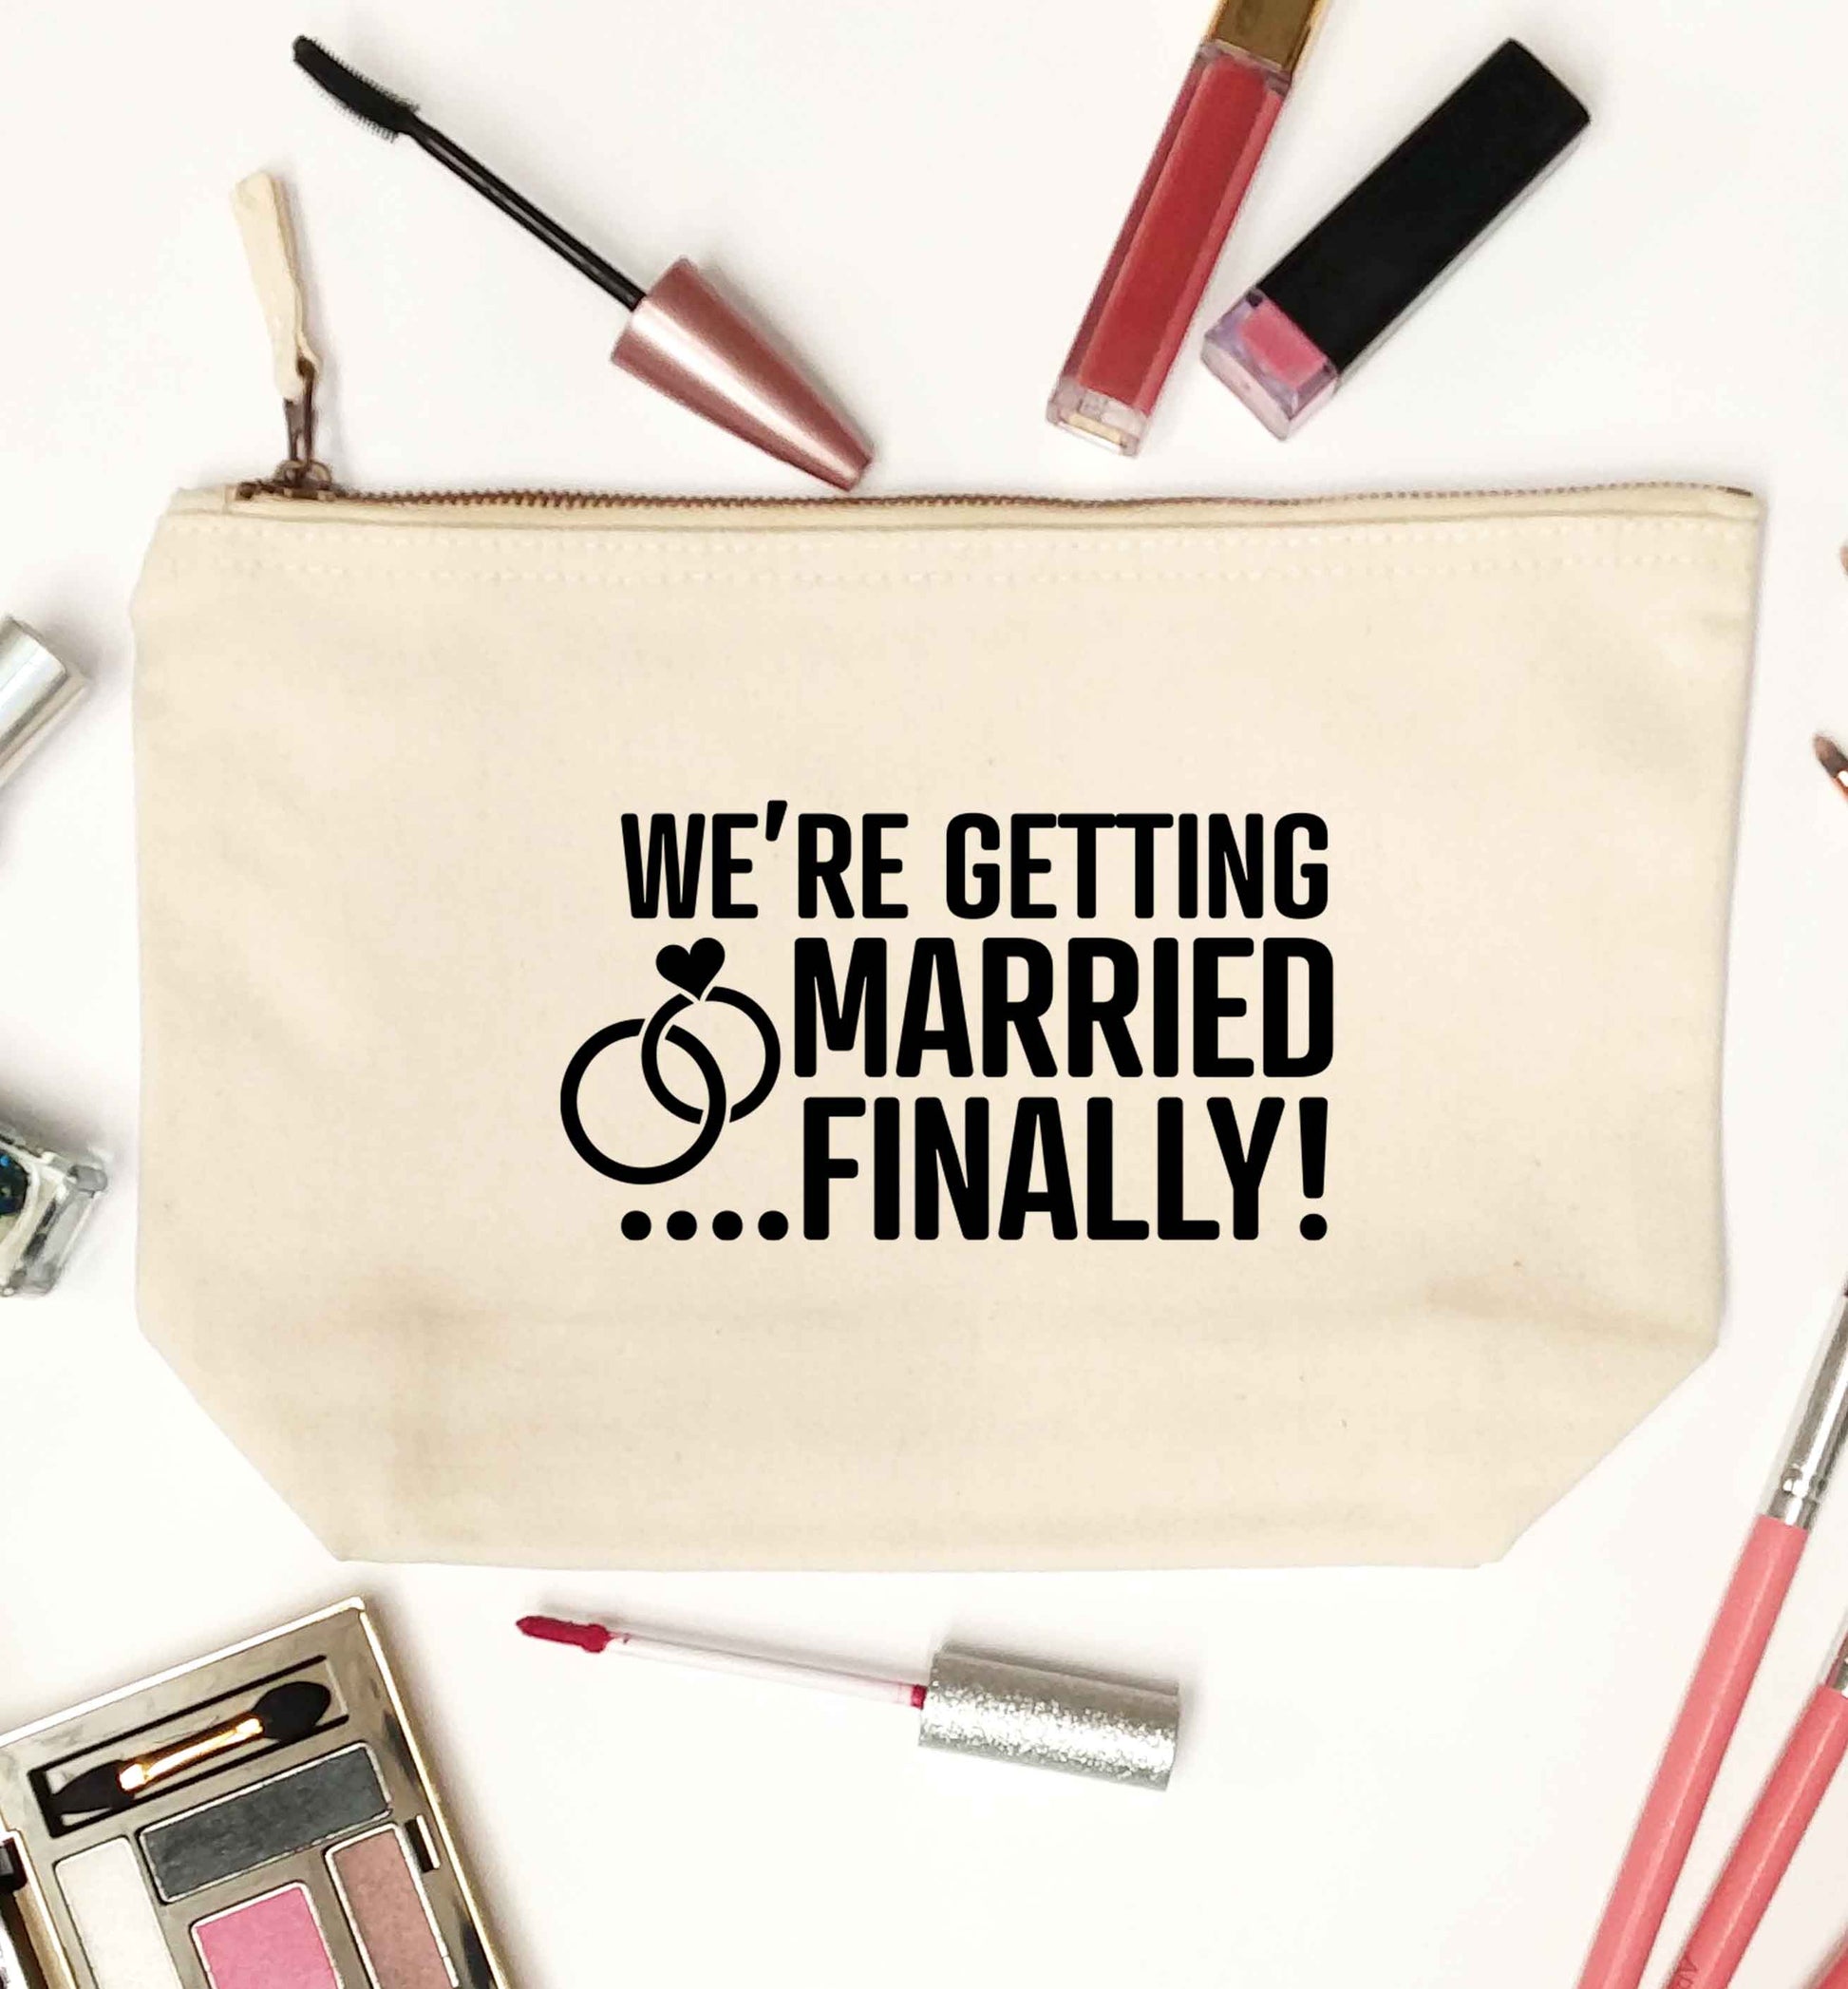 It's been a long wait but it's finally happening! Let everyone know you're celebrating your big day soon! natural makeup bag